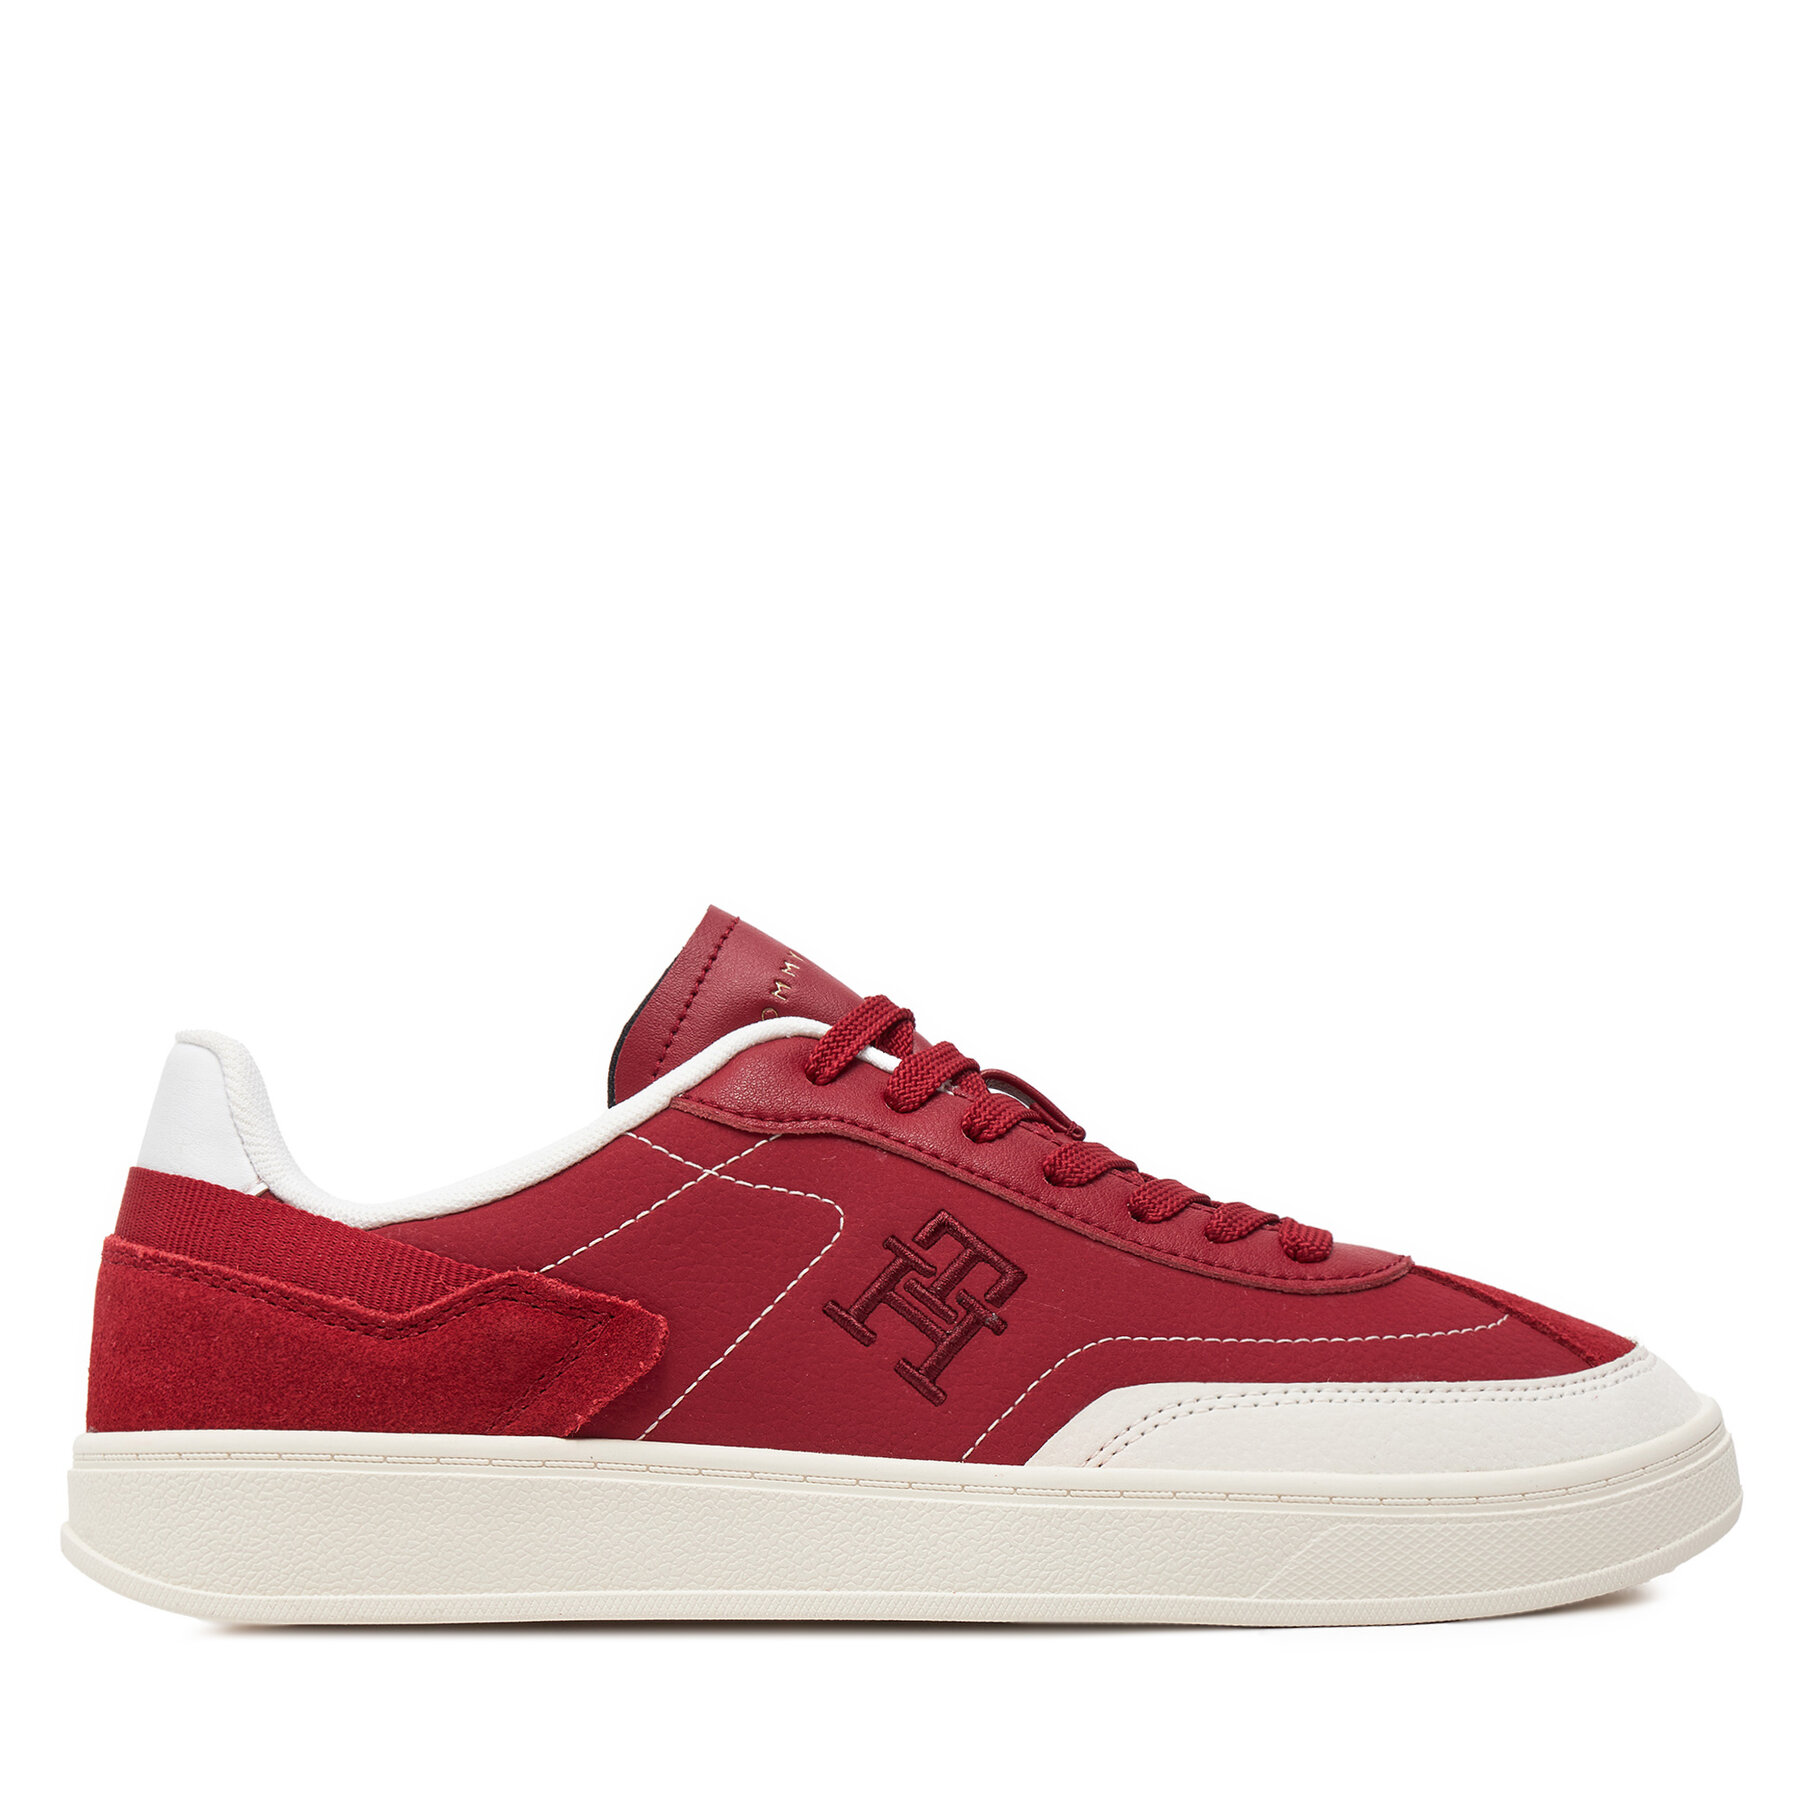 Sneakers Tommy Hilfiger Th Heritage Court Sneaker Sde FW0FW08037 Rot von Tommy Hilfiger